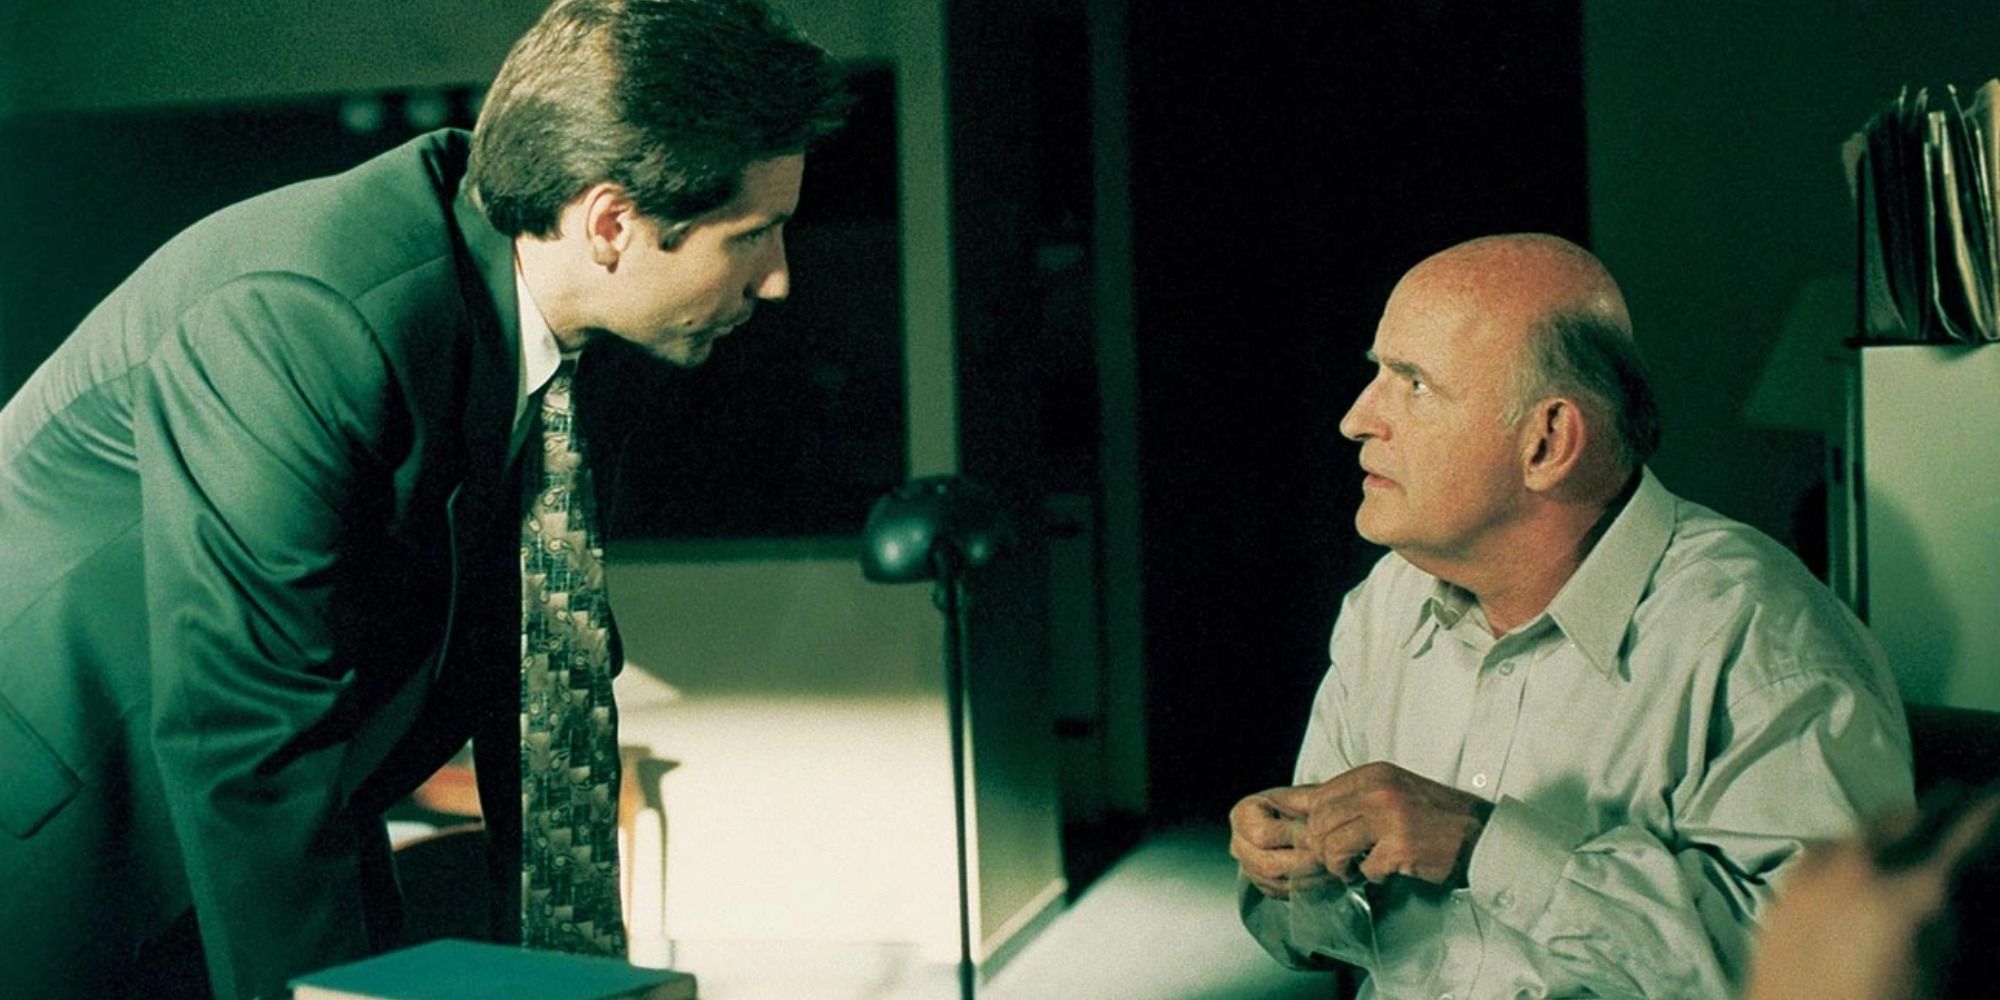 David Duchovny and Peter Boyle in The X-Files - Clyde Bruckman’s Final Repose